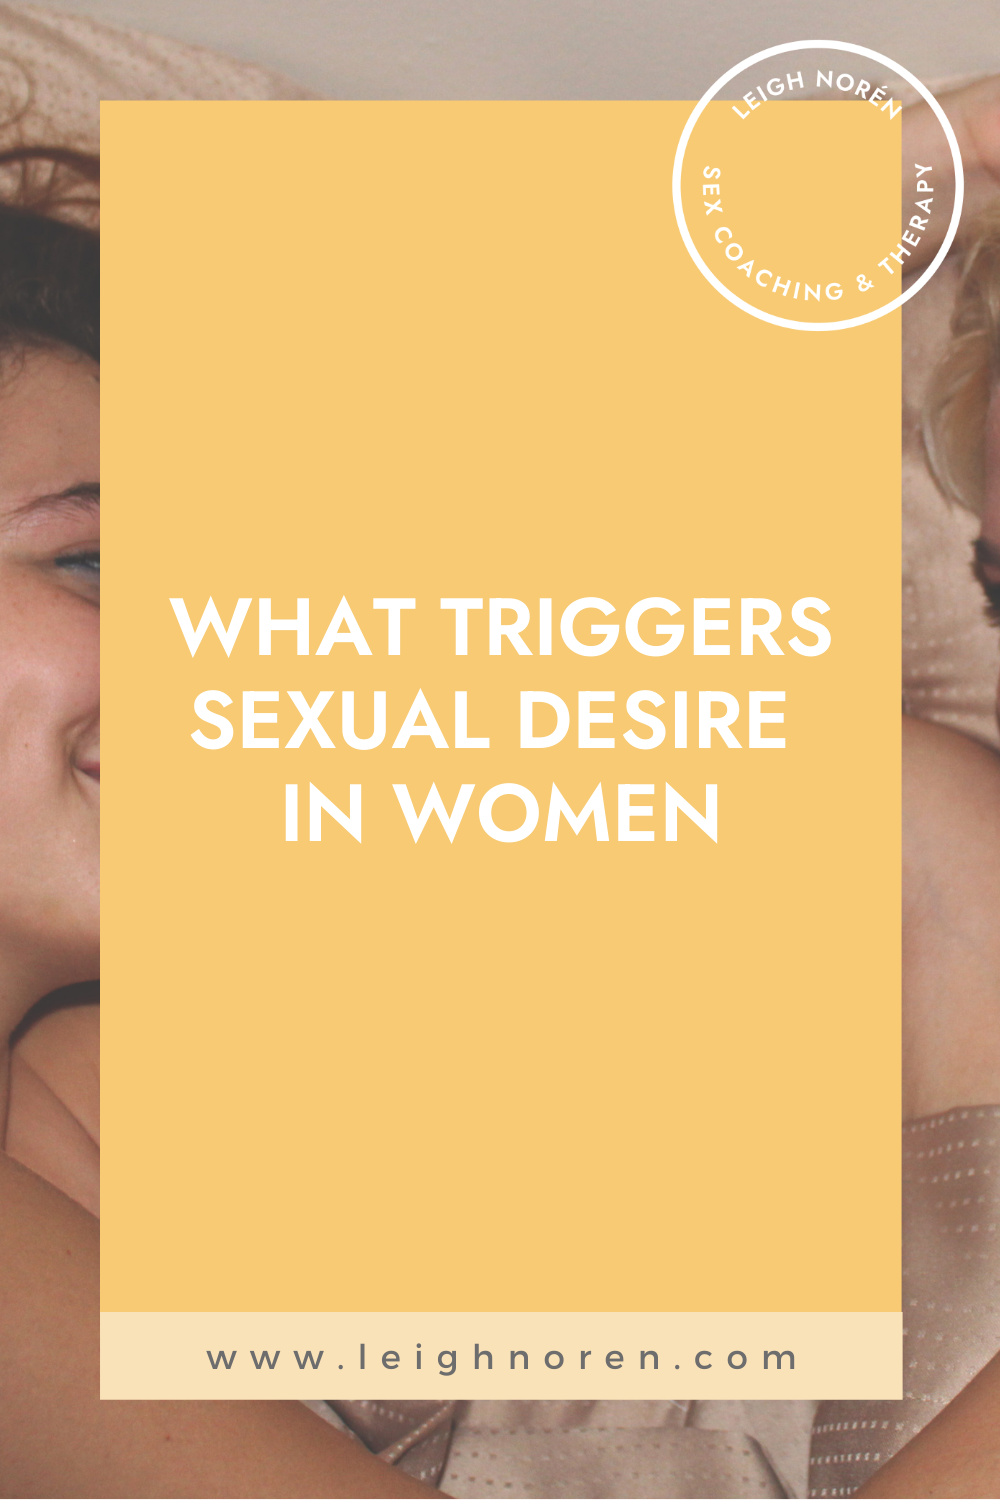 What Triggers Sexual Desire In Women | Leigh Norén